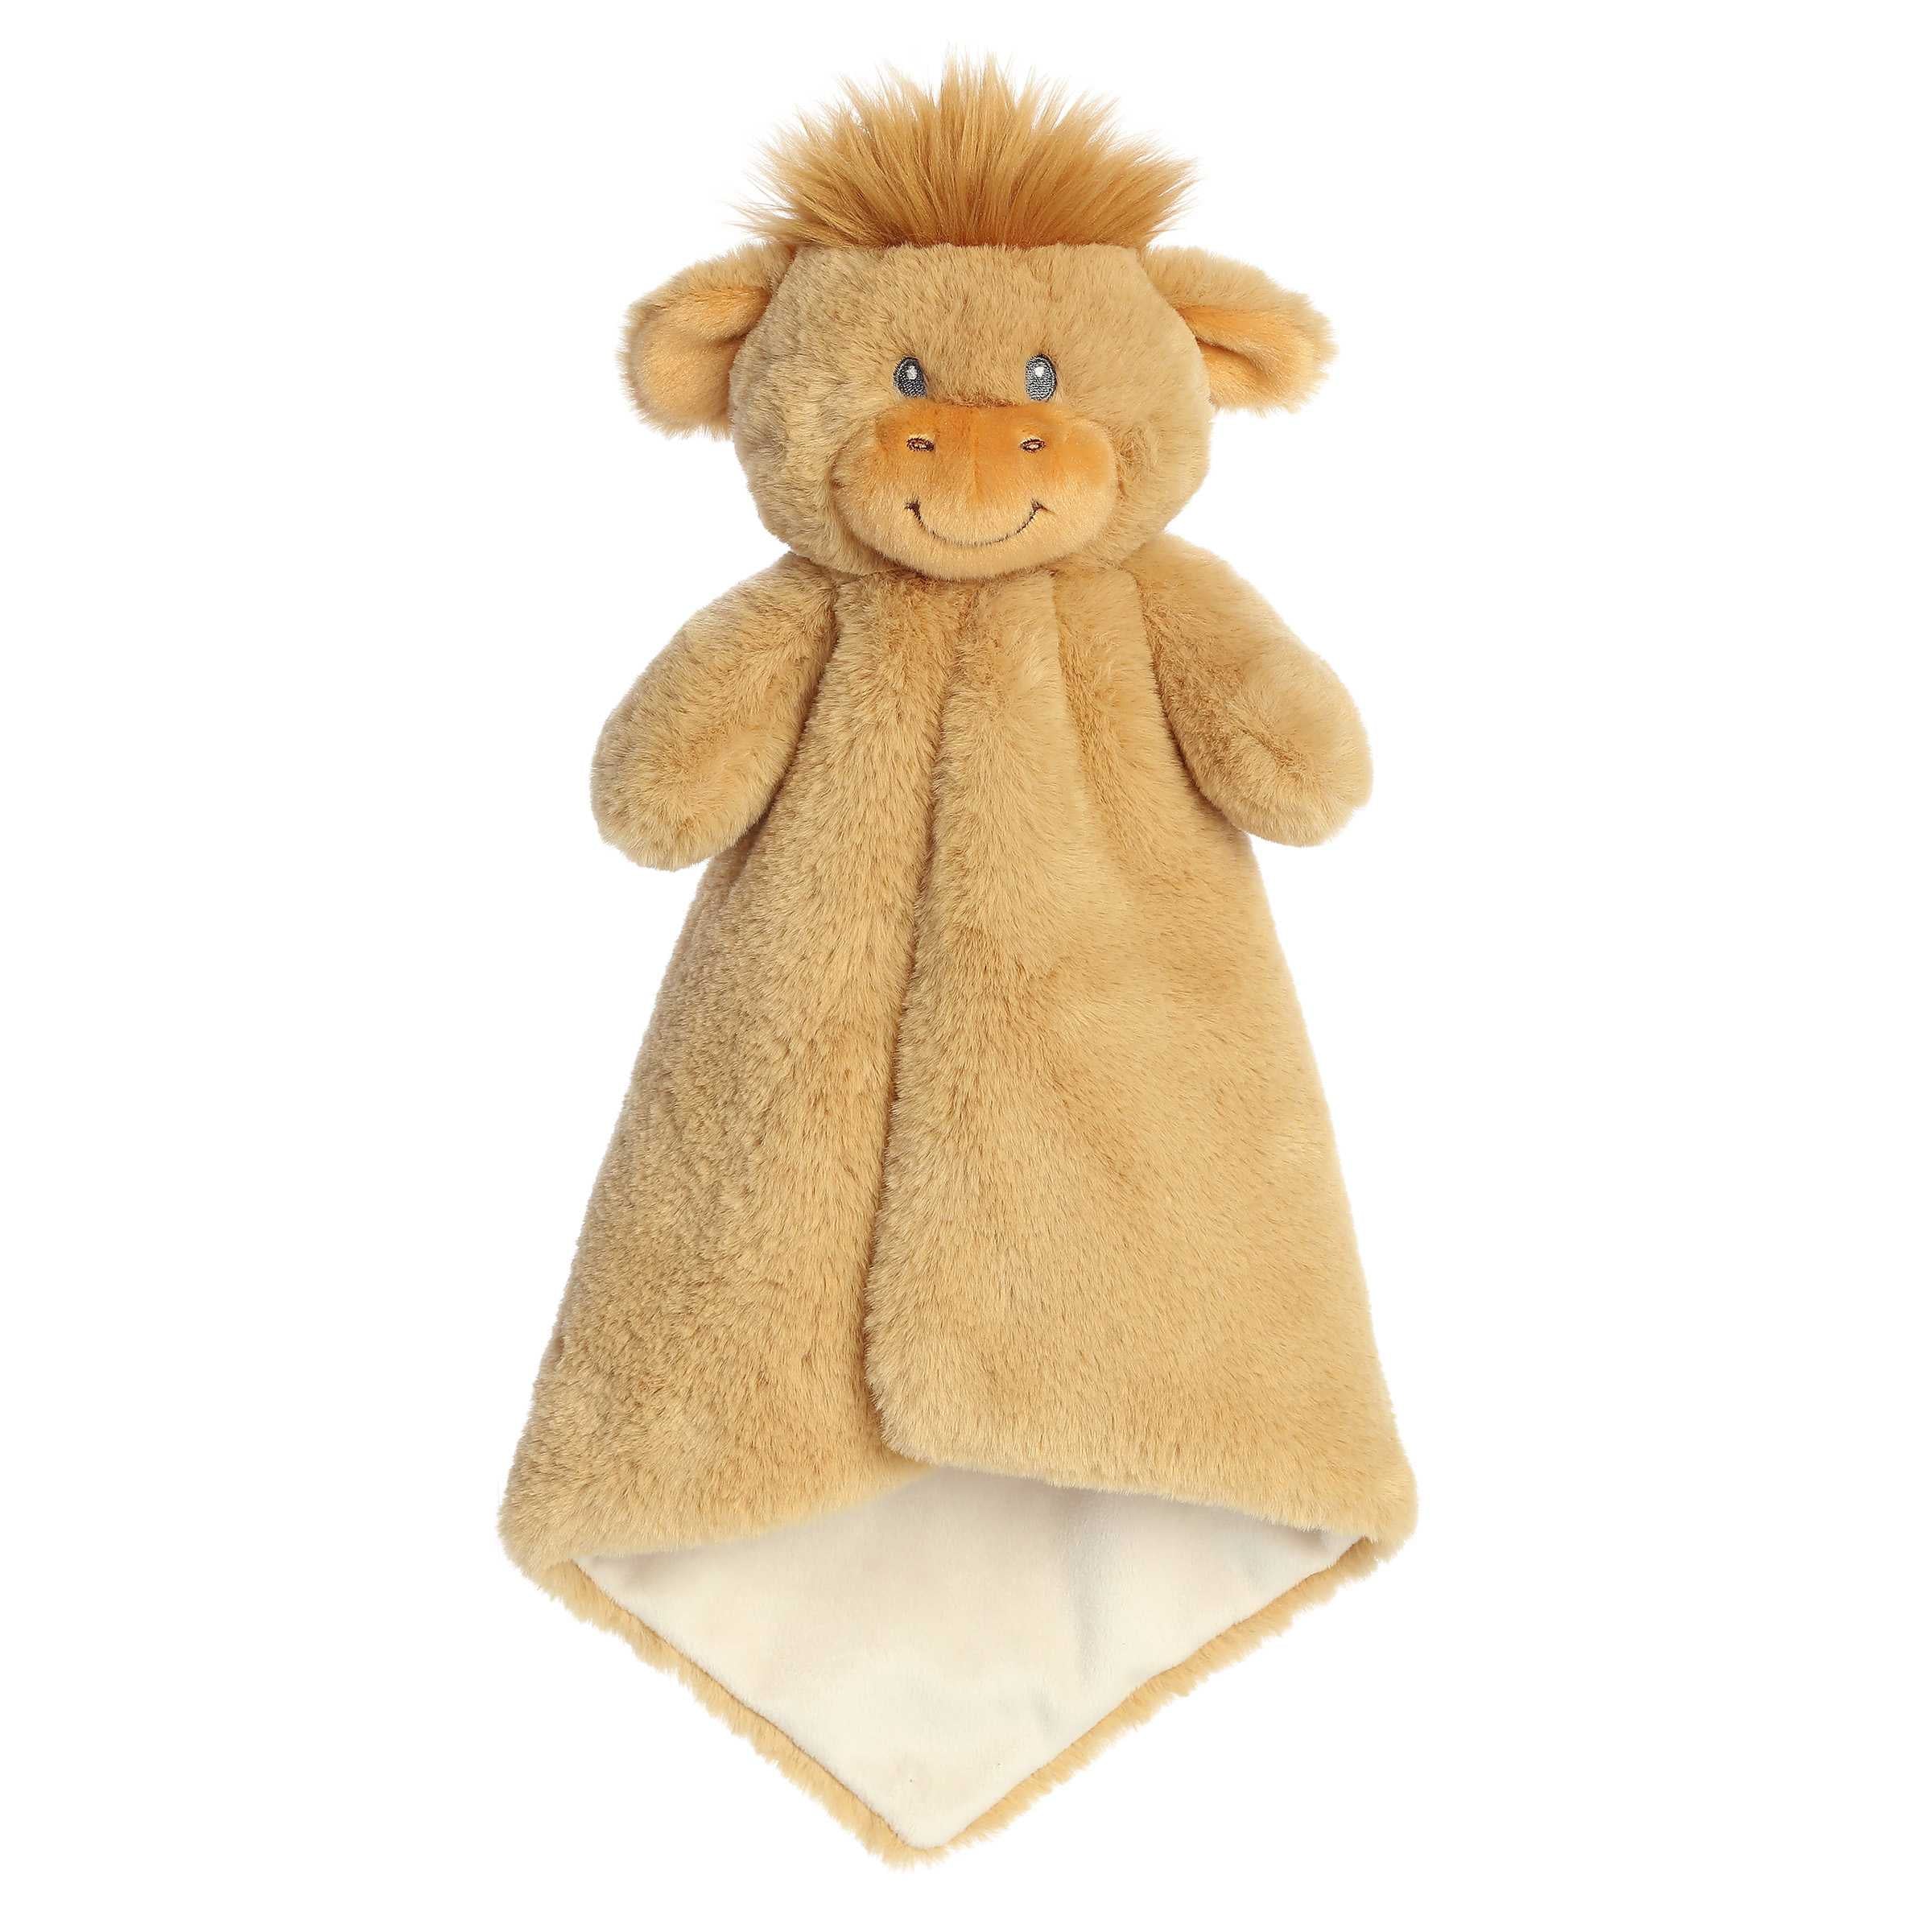 Plush highland cow head with a soft, comforting blanket, designed for baby cuddles, by ebba Cuddlers.